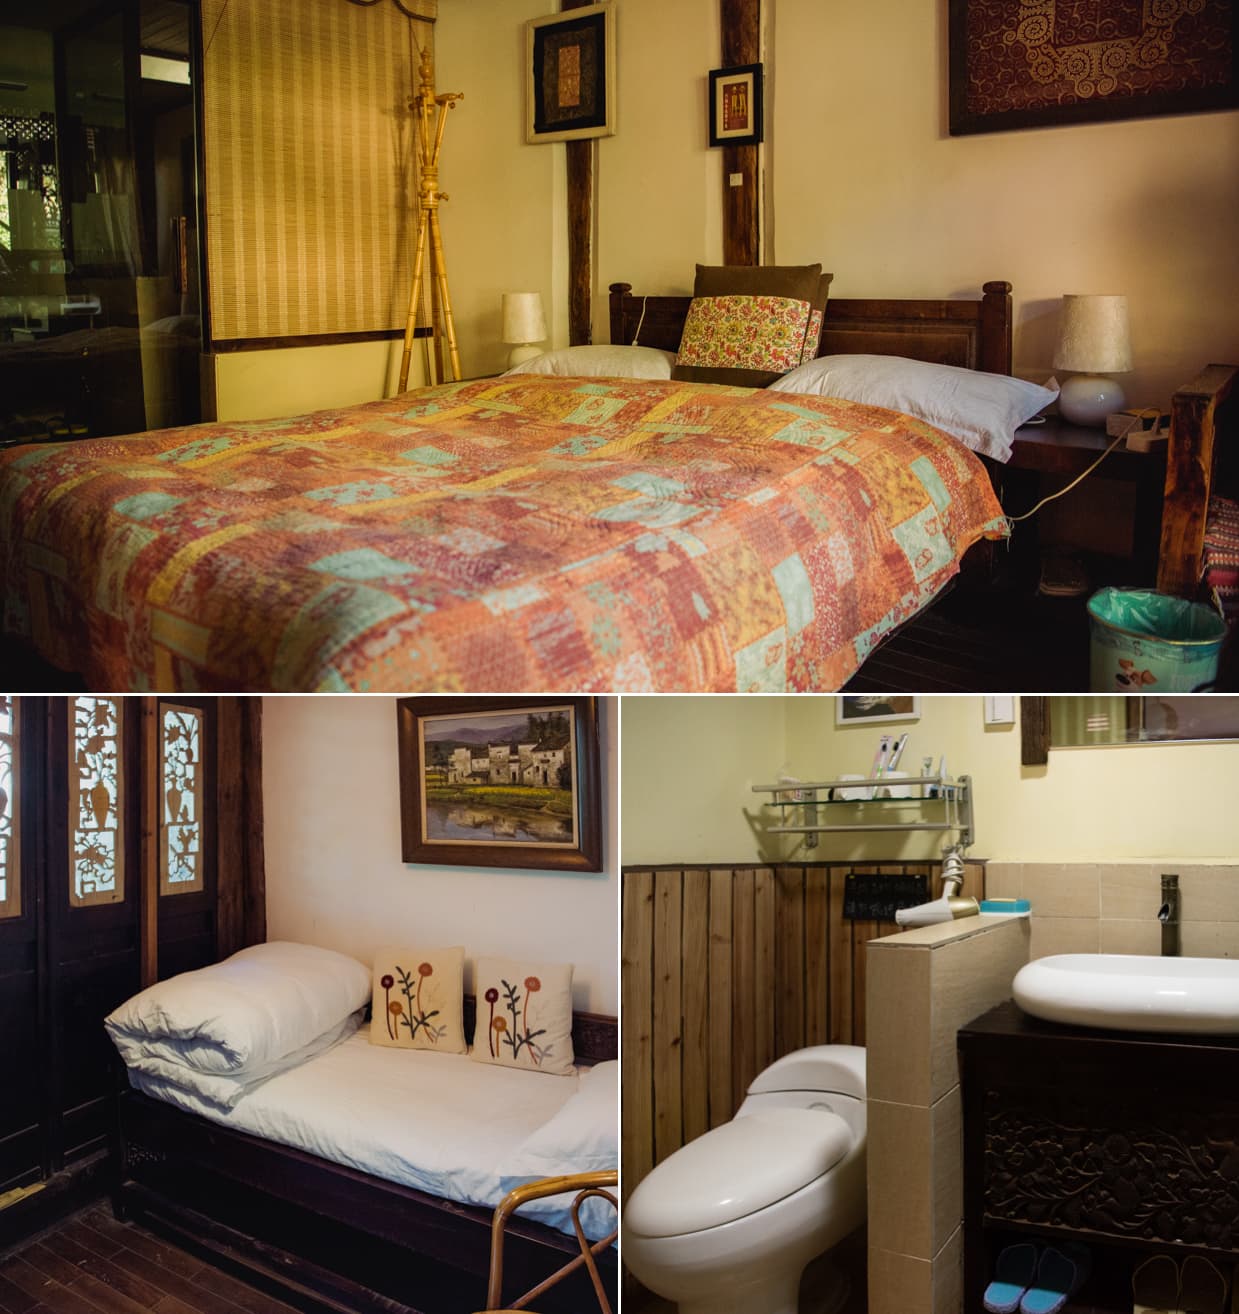 Our Shuhe Hotel: Beds and bathroom.